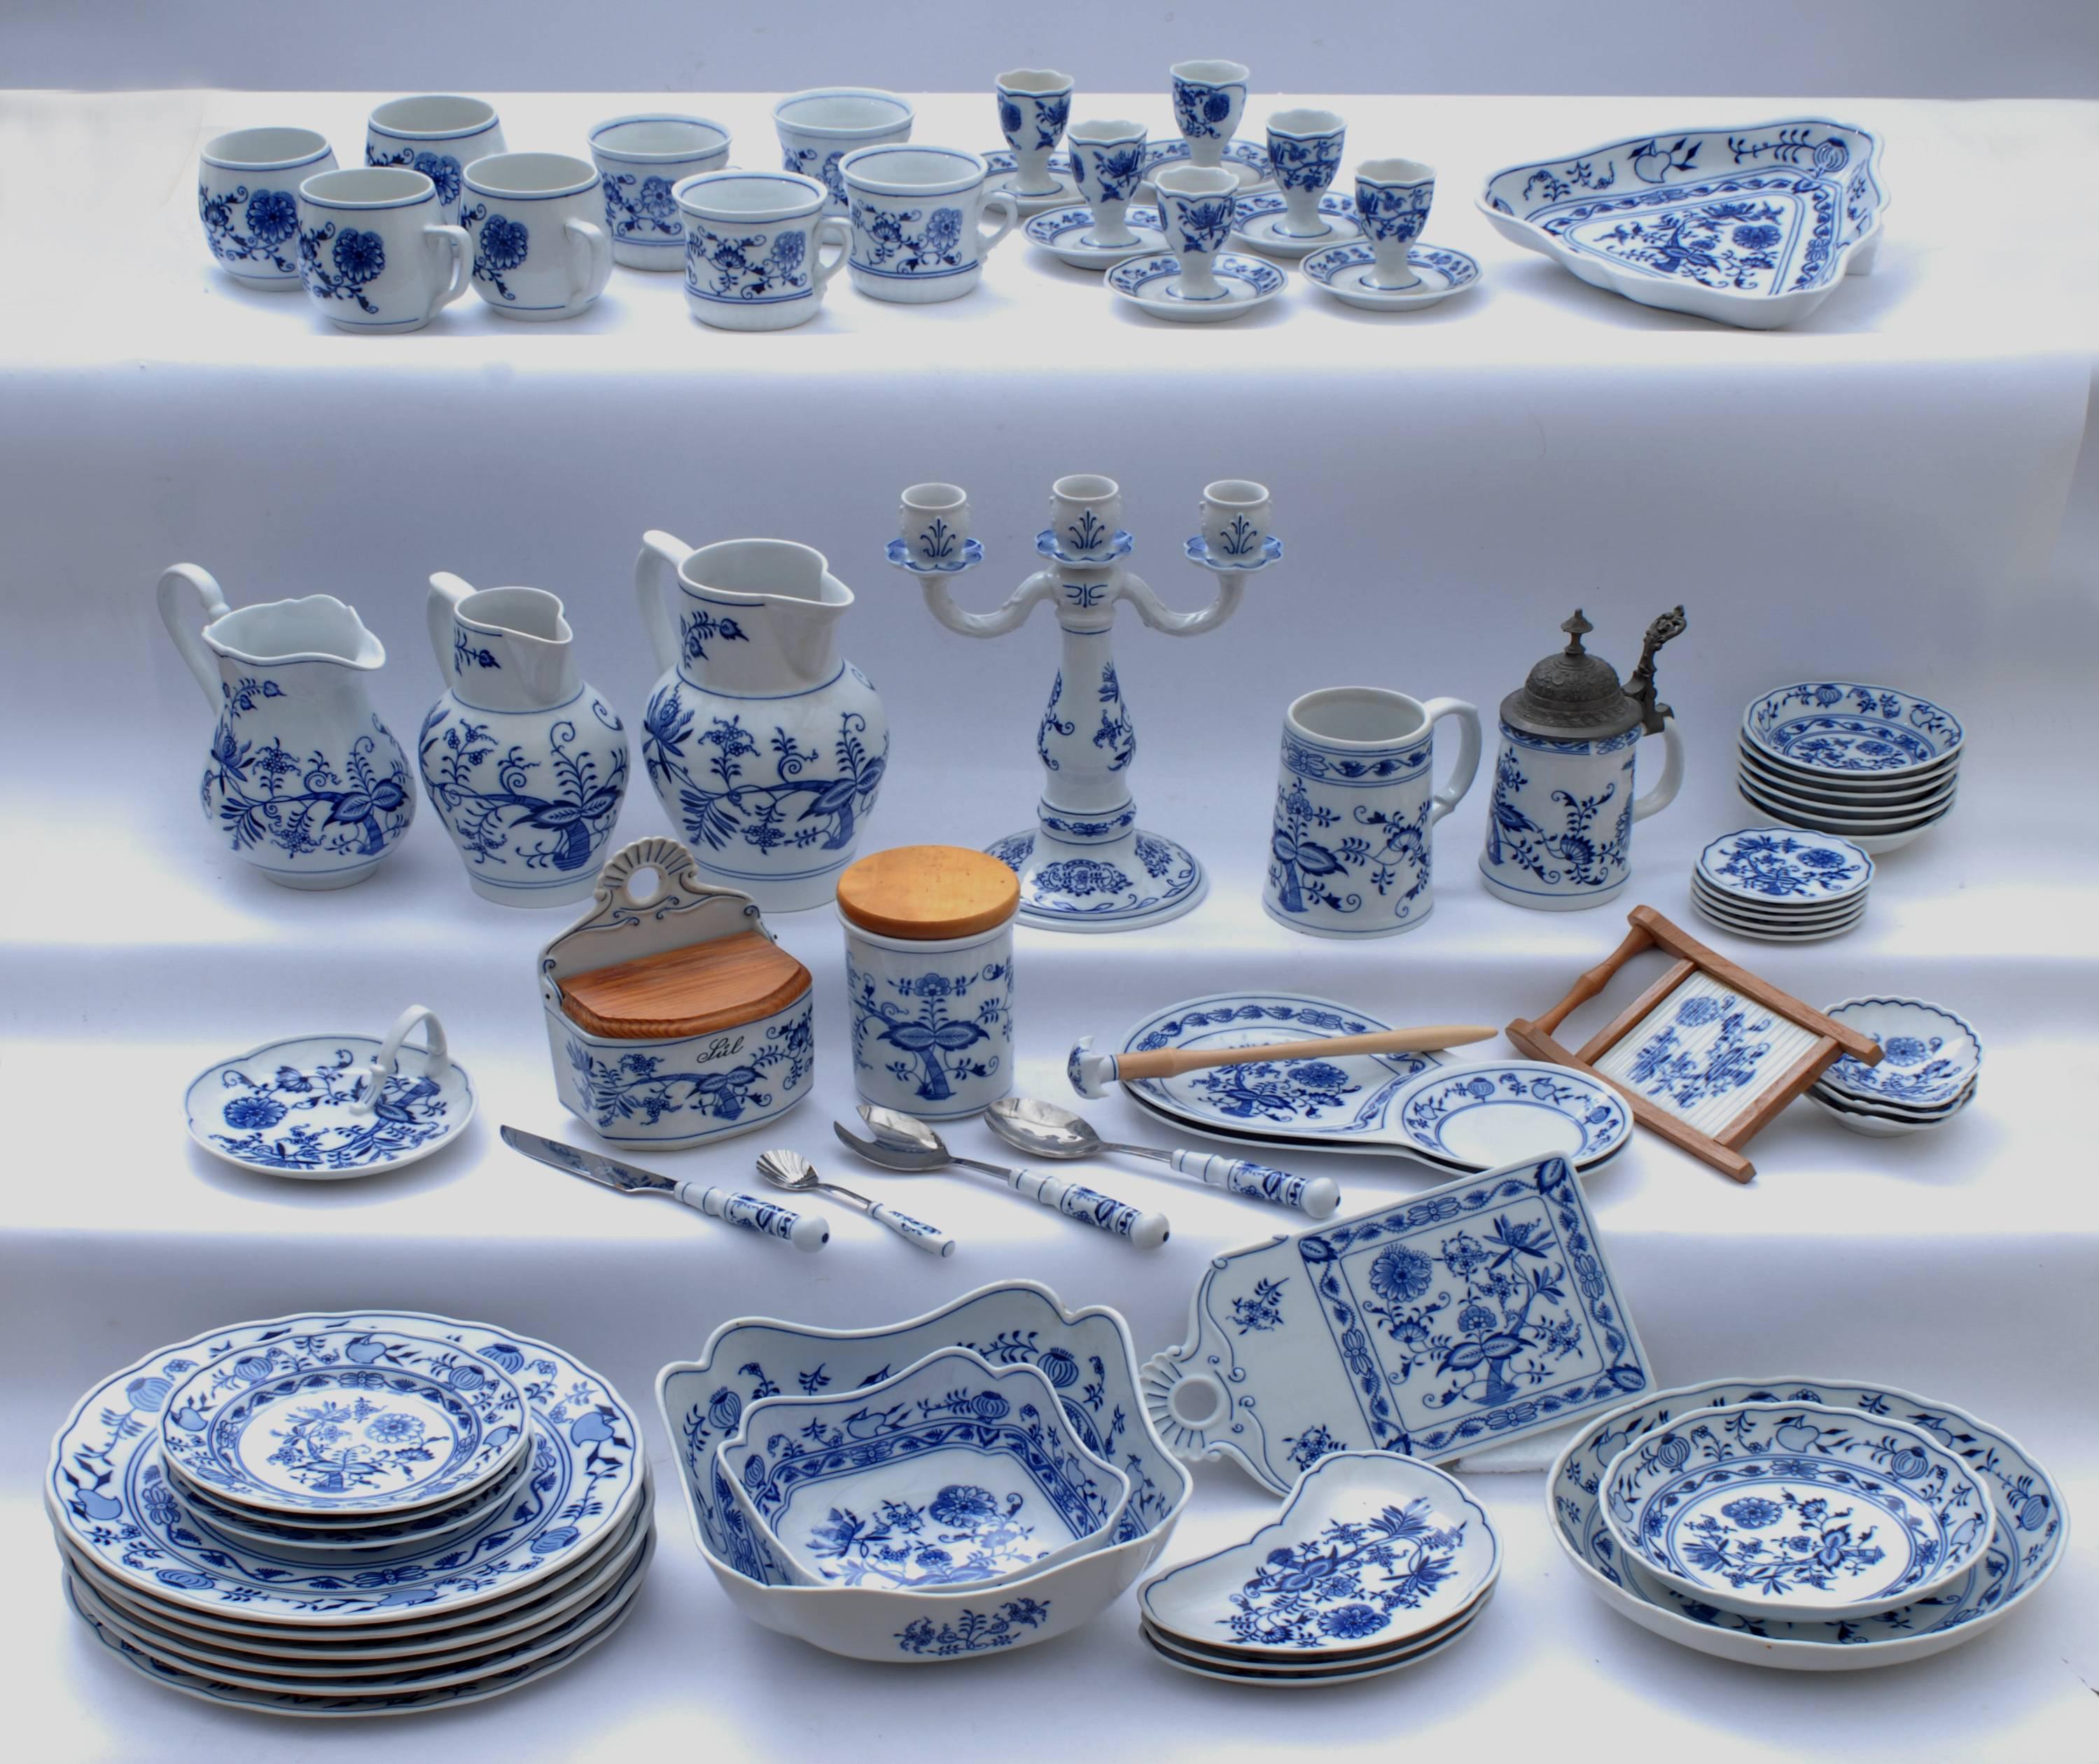 An incredible set of 305(!) pieces of Zwiebelmuster porcelain tableware, manufactured by Meissen in Germany and Original Bohemia in the Czech Republic between 1885 and 1992.

This incredibly large set was the personal collection of a Lady in Czech